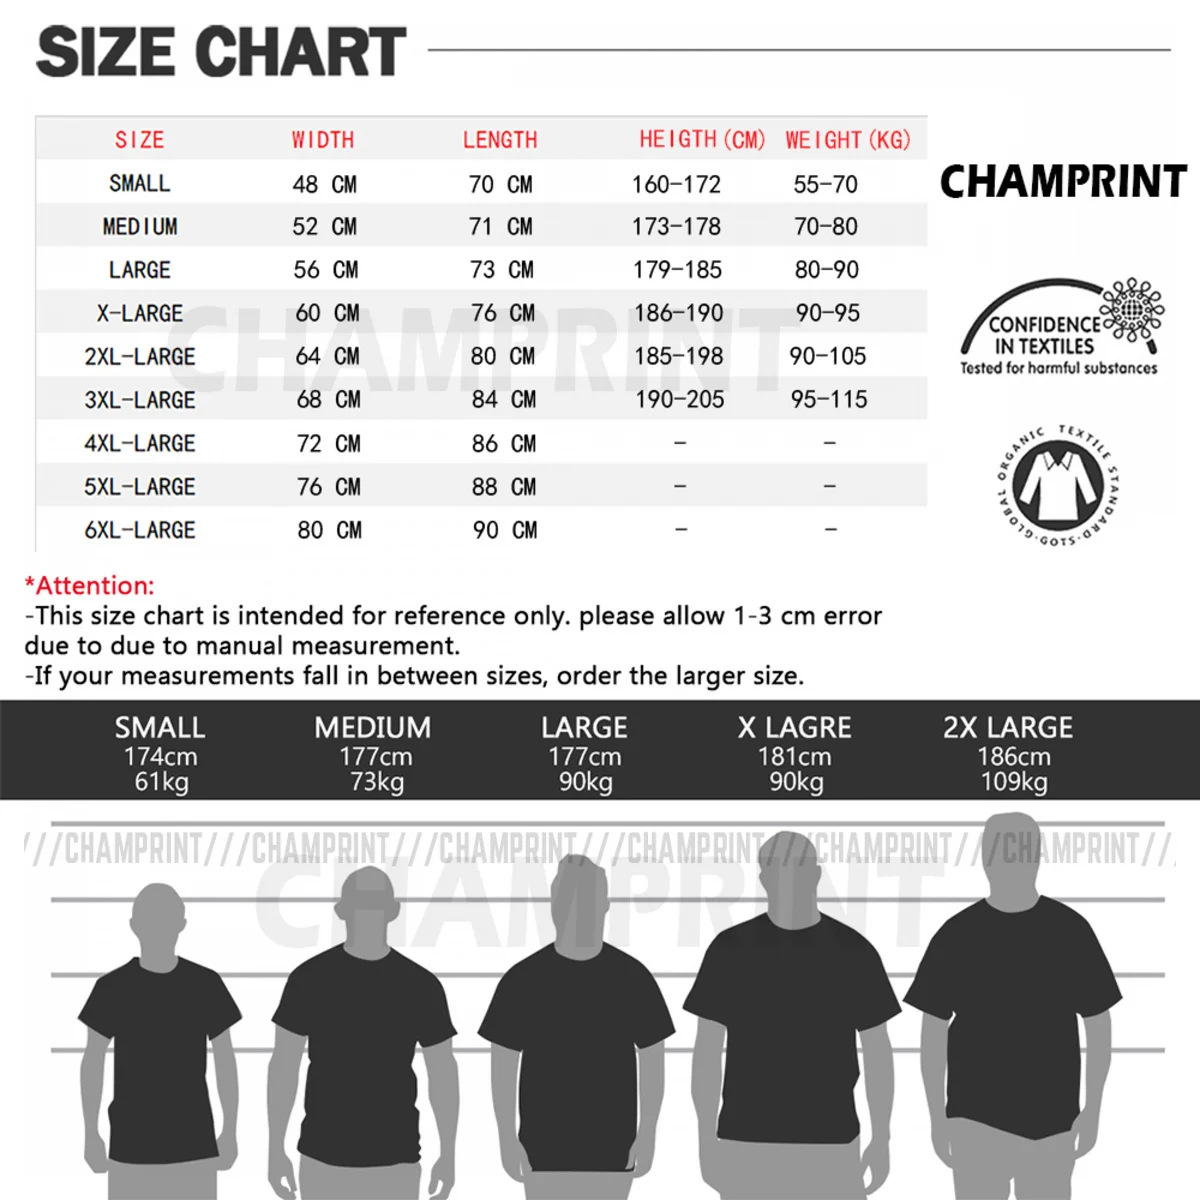 

Beer Is Always A Good Idea T Shirt Men's Cotton Vintage T-Shirt Round Collar Funny Tees Short Sleeve Tops Graphic Printed